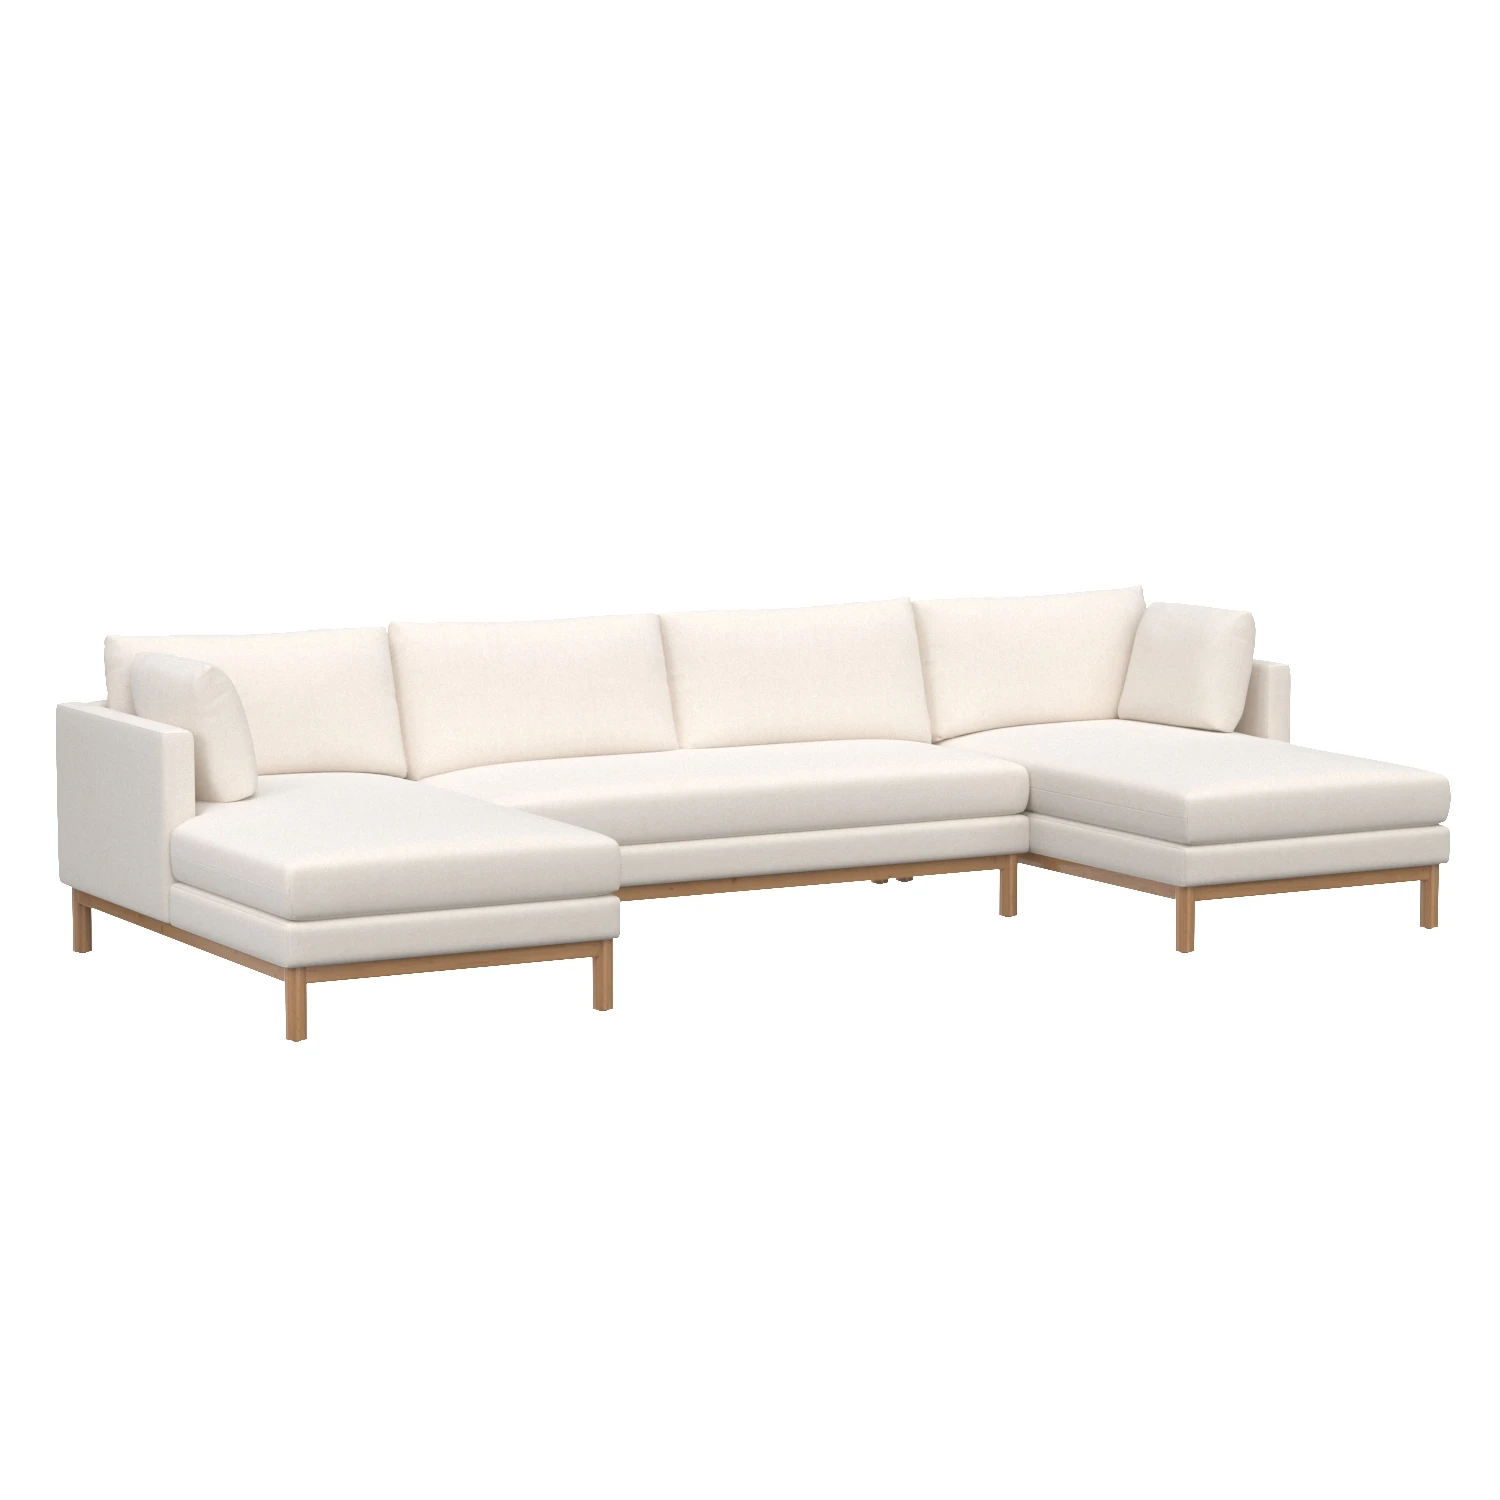 Hargrove 3-Piece U-Shaped Chaise Sectional 138 inch 3D Model_06